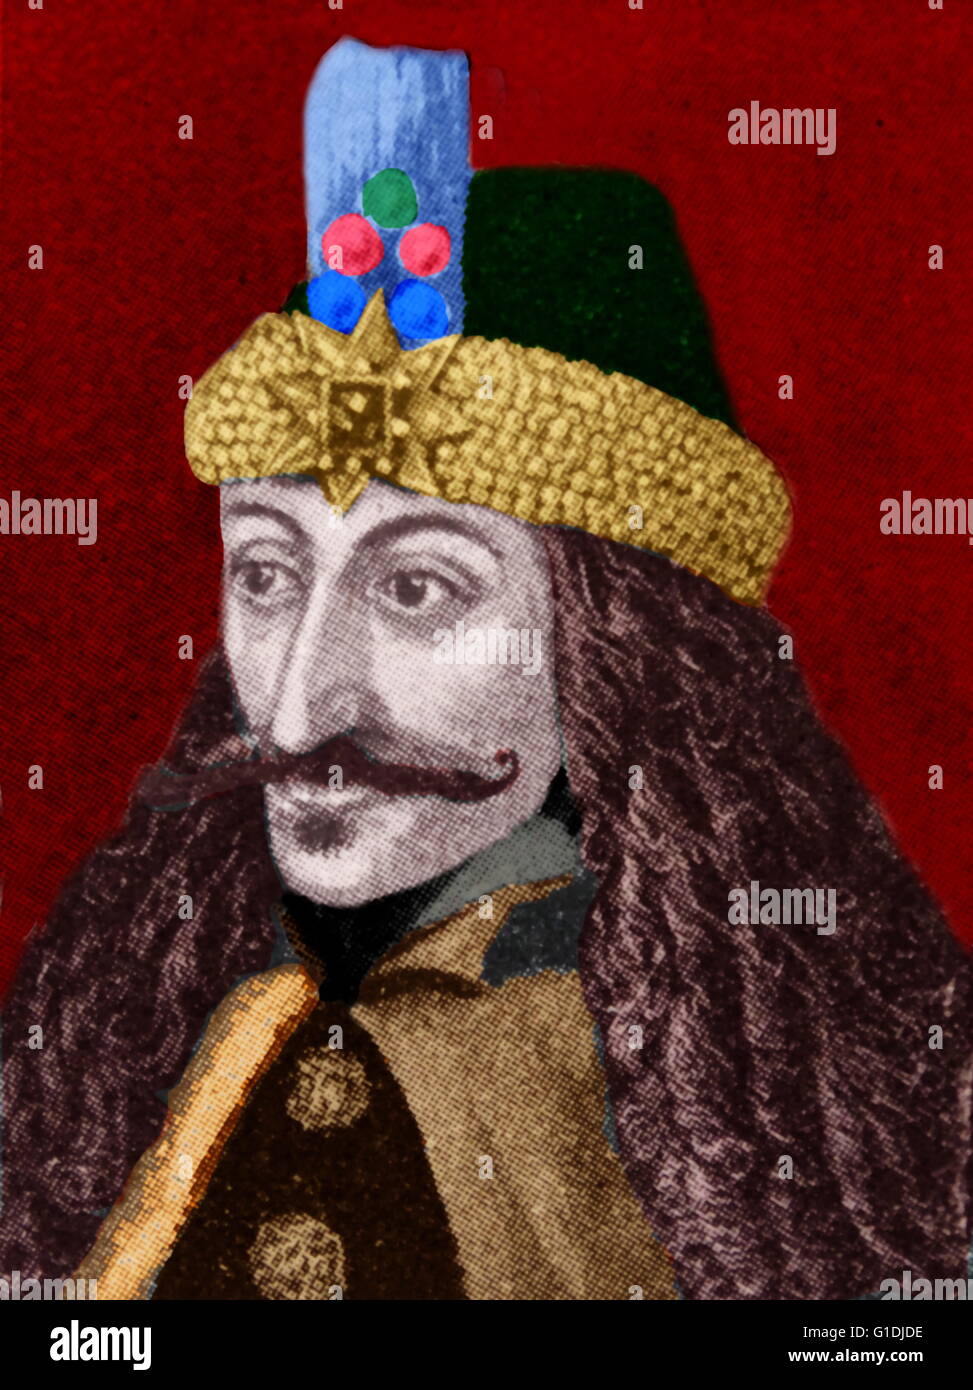 Vlad the impaler (1431-1477) prince of the house of draculesti, lord of Wallachia (in modern day Romania) associated with the Dracula legend and the story by Bram Stoker. Stock Photo